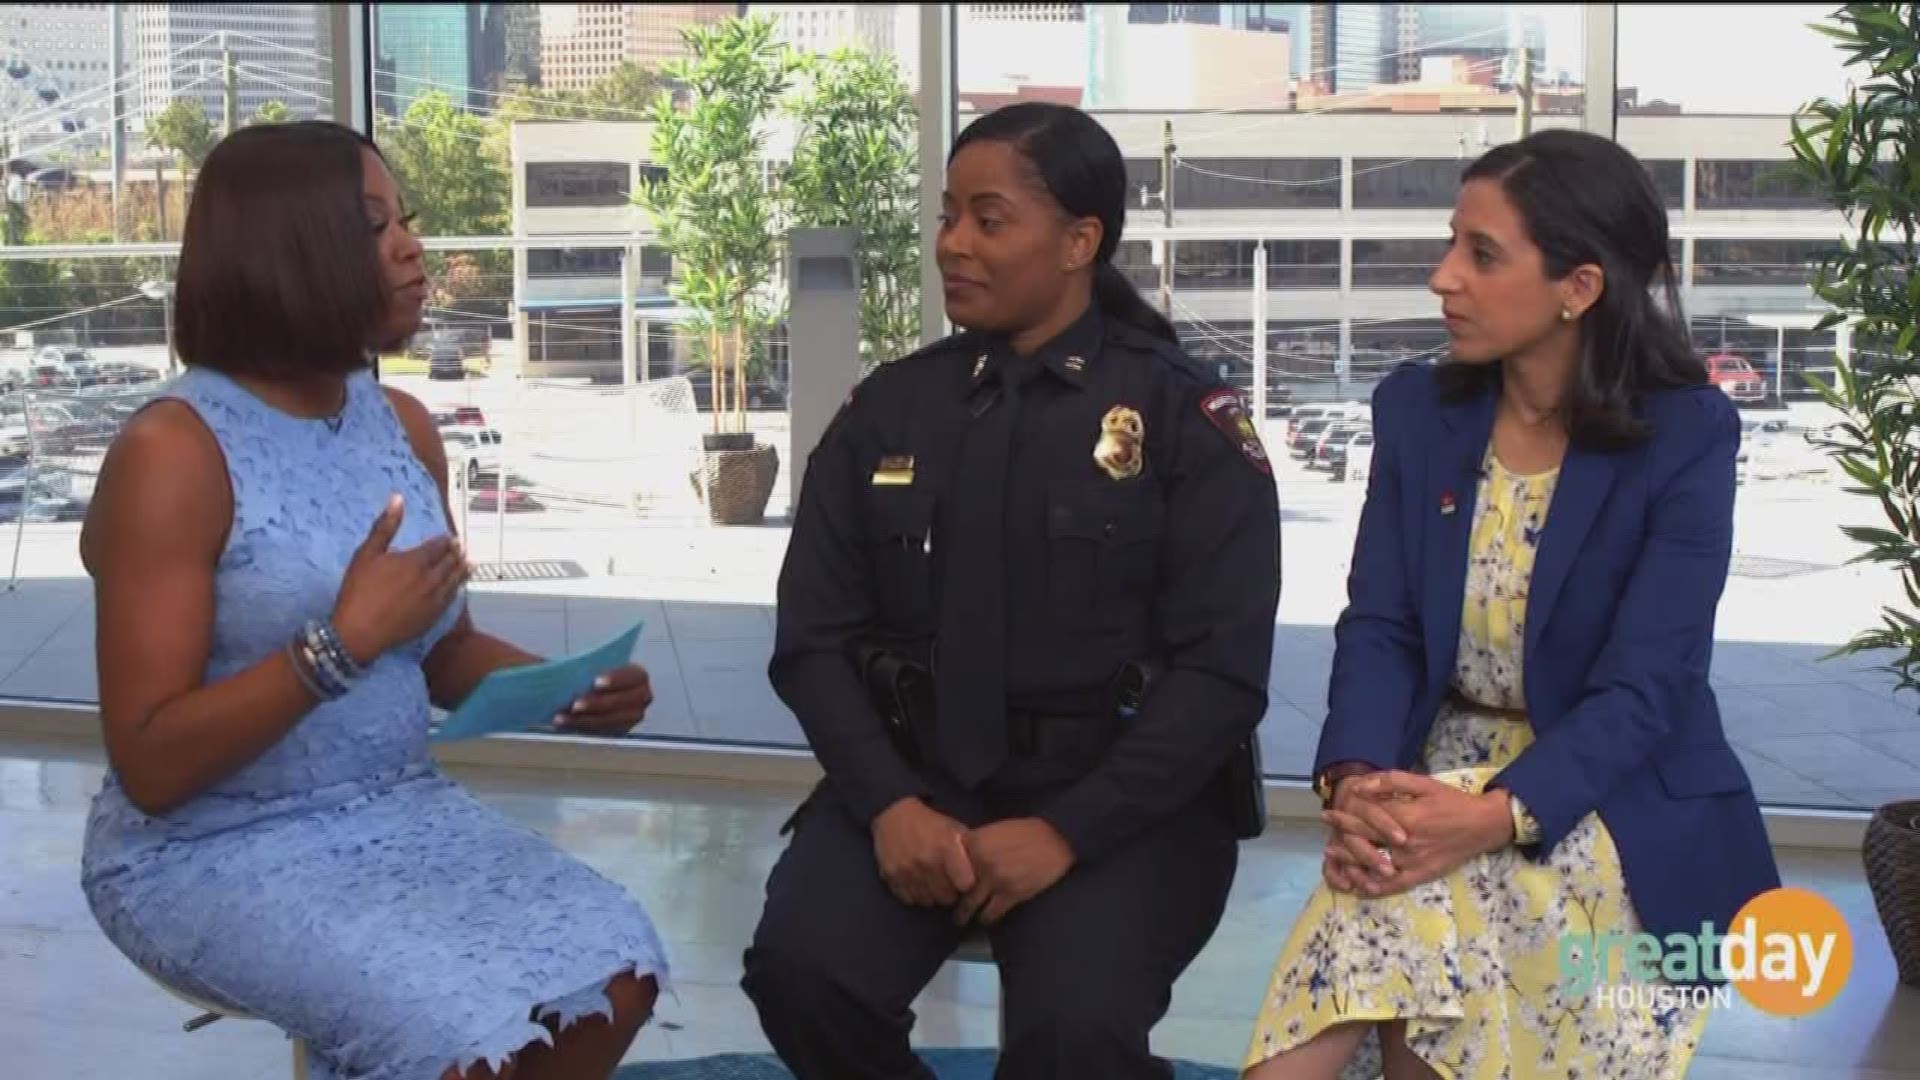 A discussion on keeping our kids safe in school and how to prevent violence before it happens